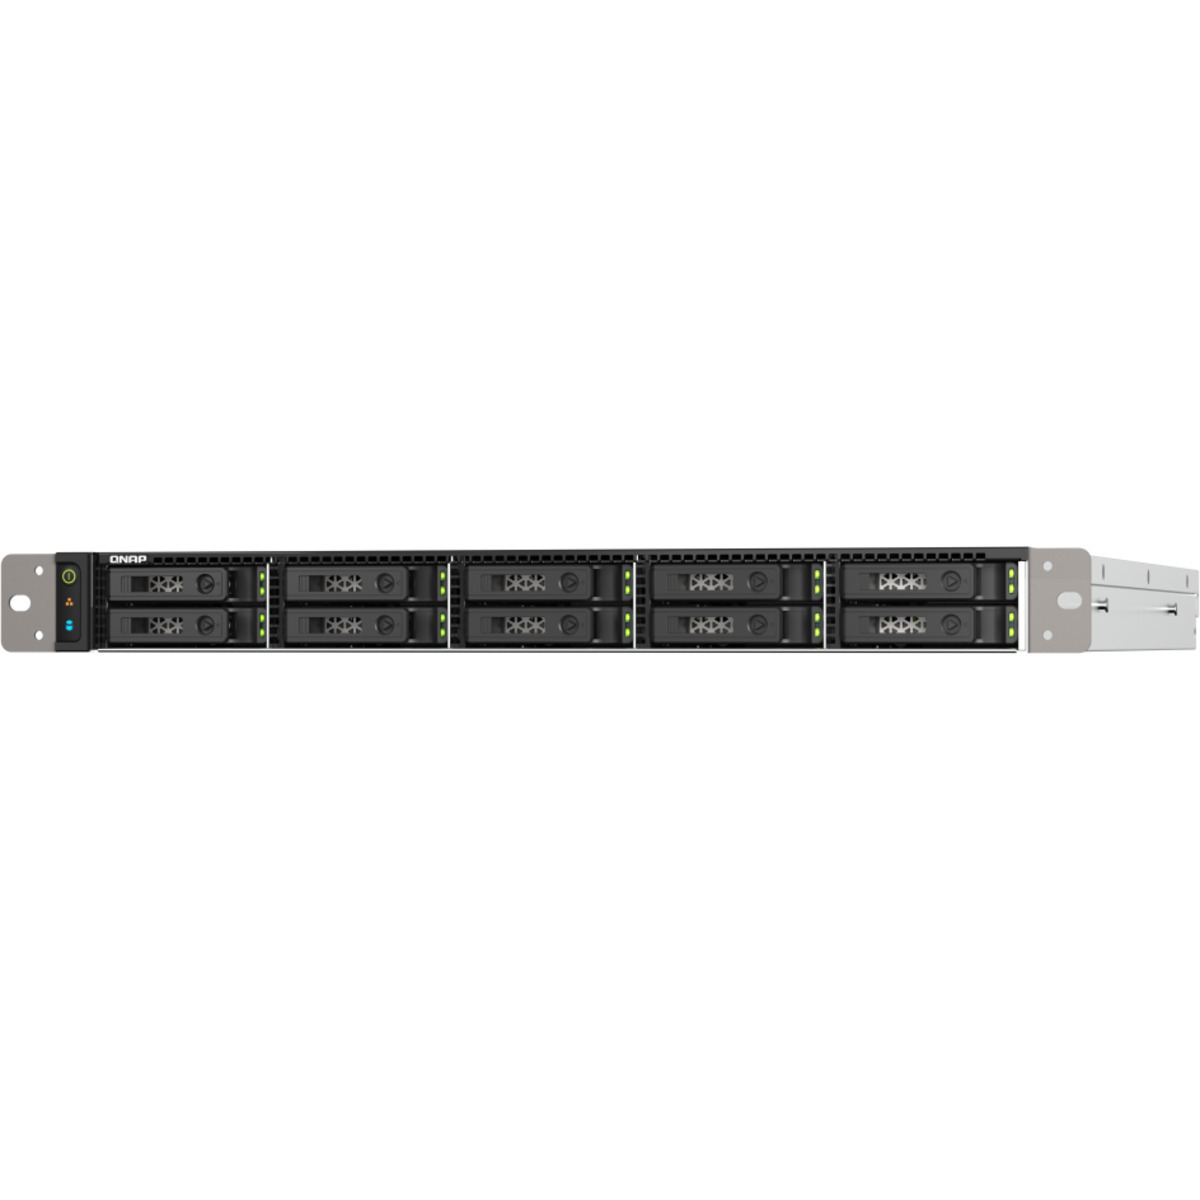 QNAP TS-h1090FU-7302P RackMount 10-Bay Large Business / Enterprise NAS - Network Attached Storage Device Burn-In Tested Configurations TS-h1090FU-7302P